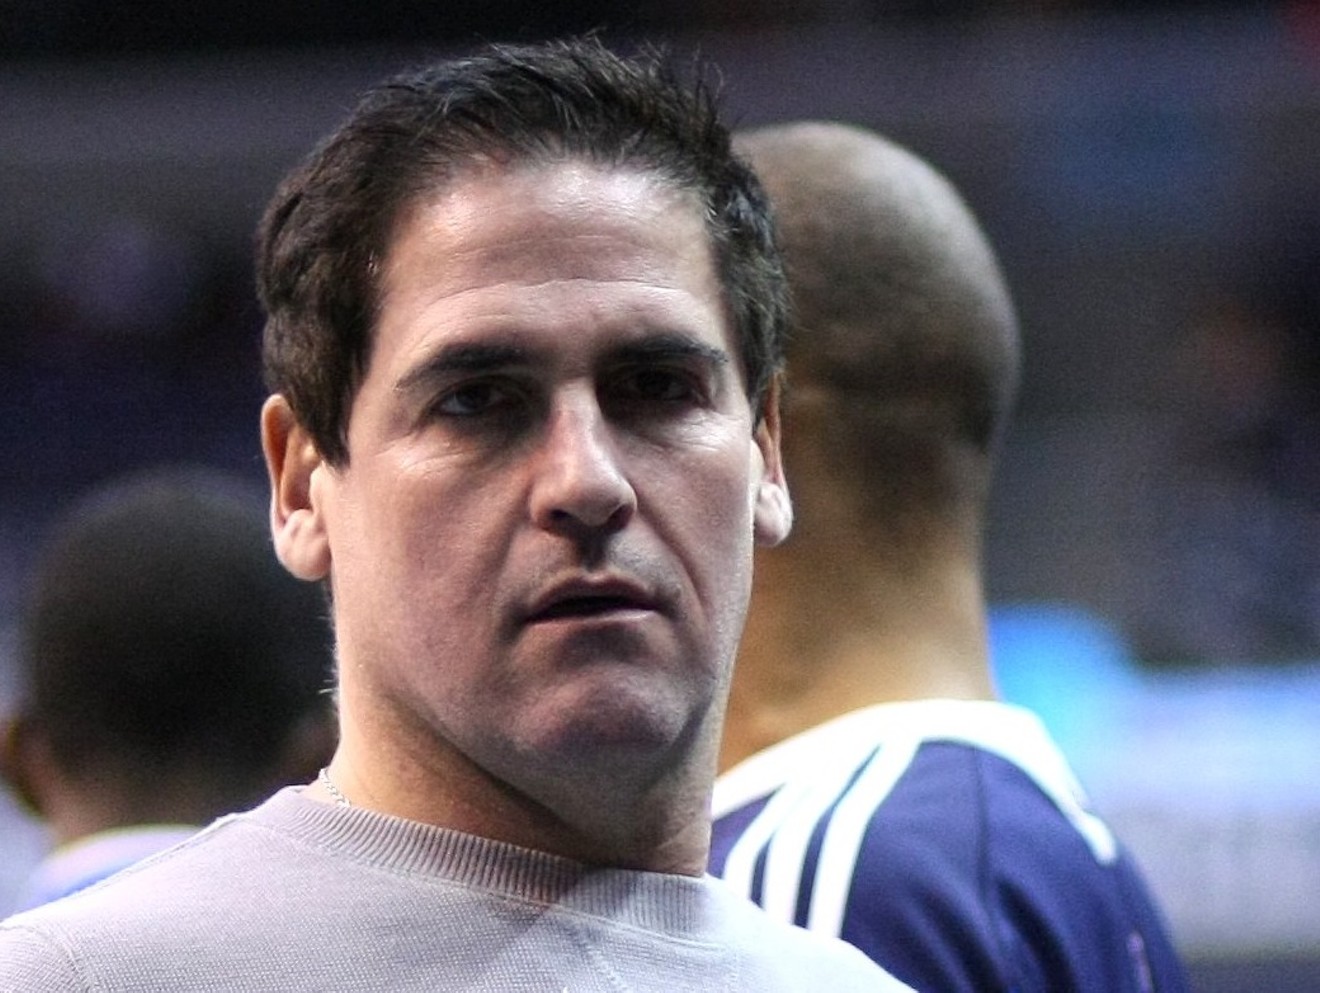 Dallas Mavericks owner Mark Cuban is staying busy during the COVID-19 pandemic.